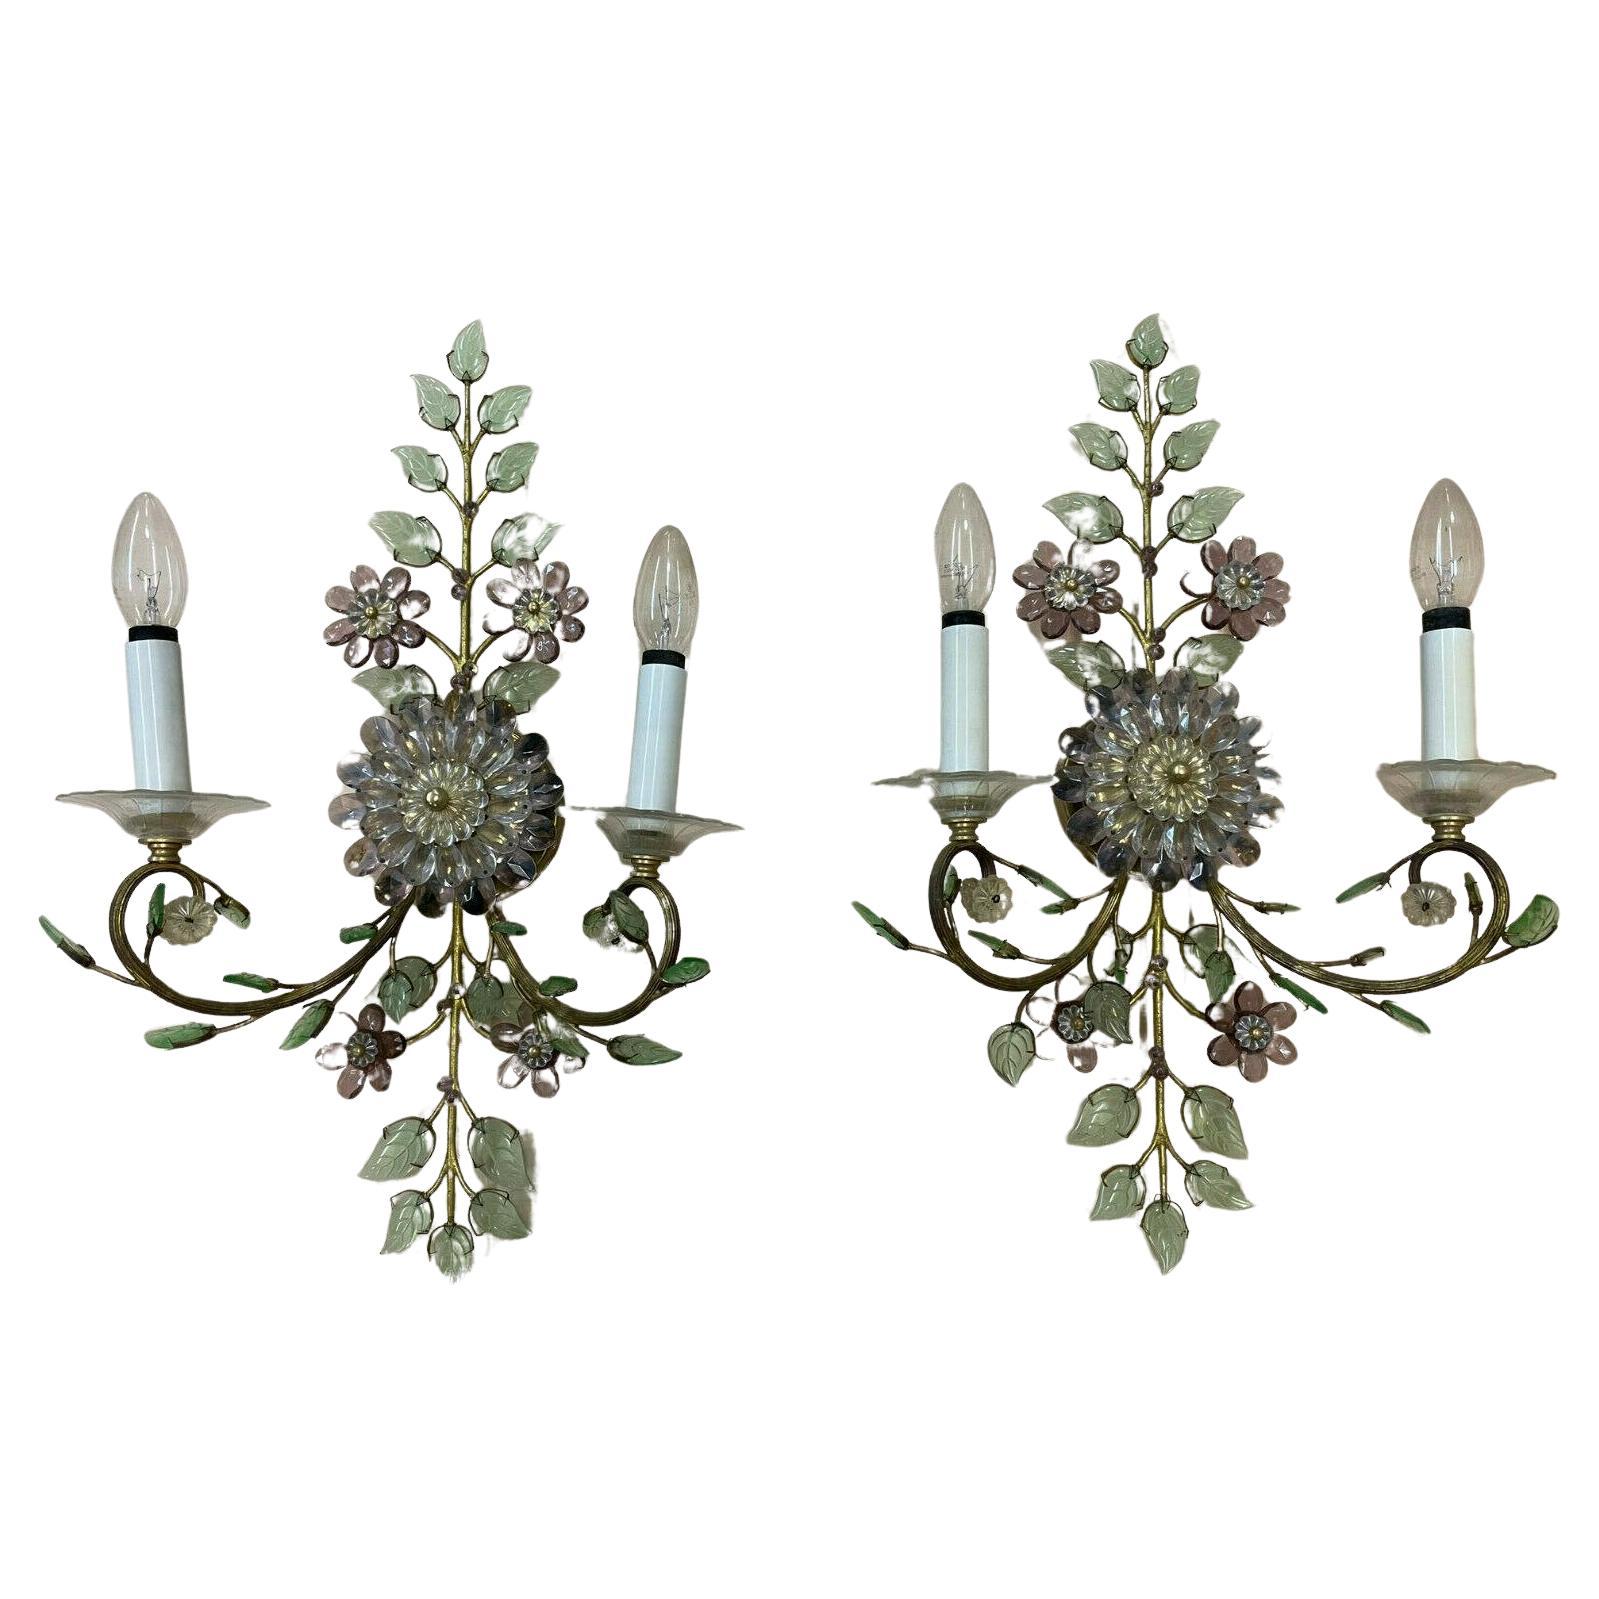 Pair XL 1940s Cut Crystal Amethyst/ Verde Flower/ Petals Wall Sconces by "Palwa" For Sale